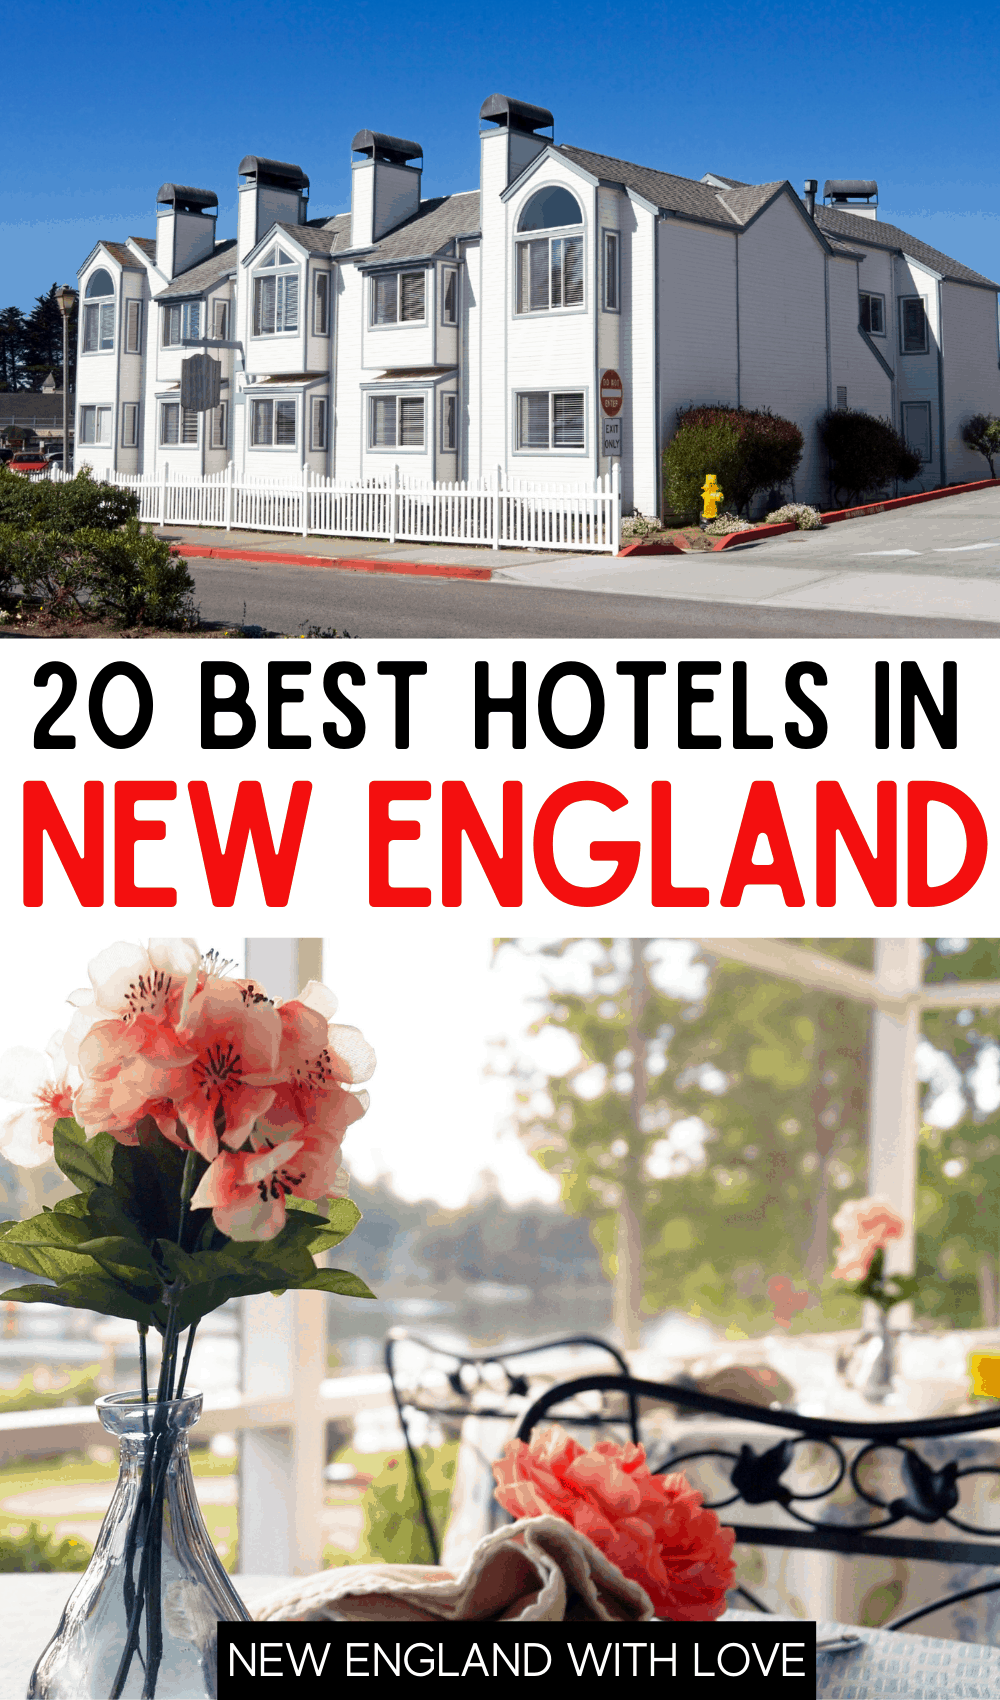 Pinterest graphic reading "20 BEST HOTELS IN NEW ENGLAND"